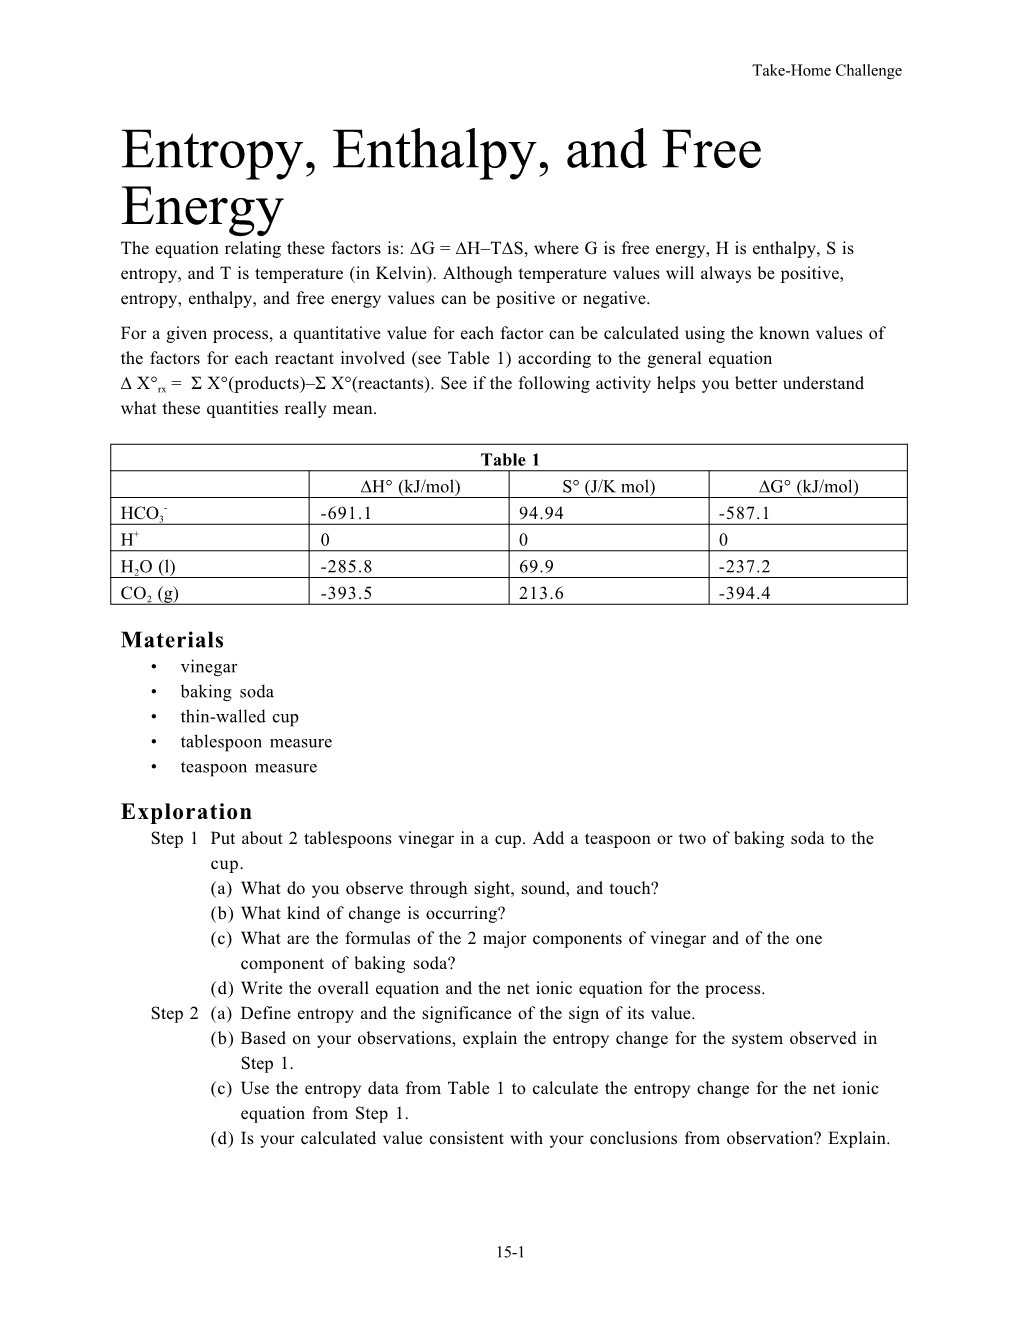 Entropy, Enthalpy, and Free Energy